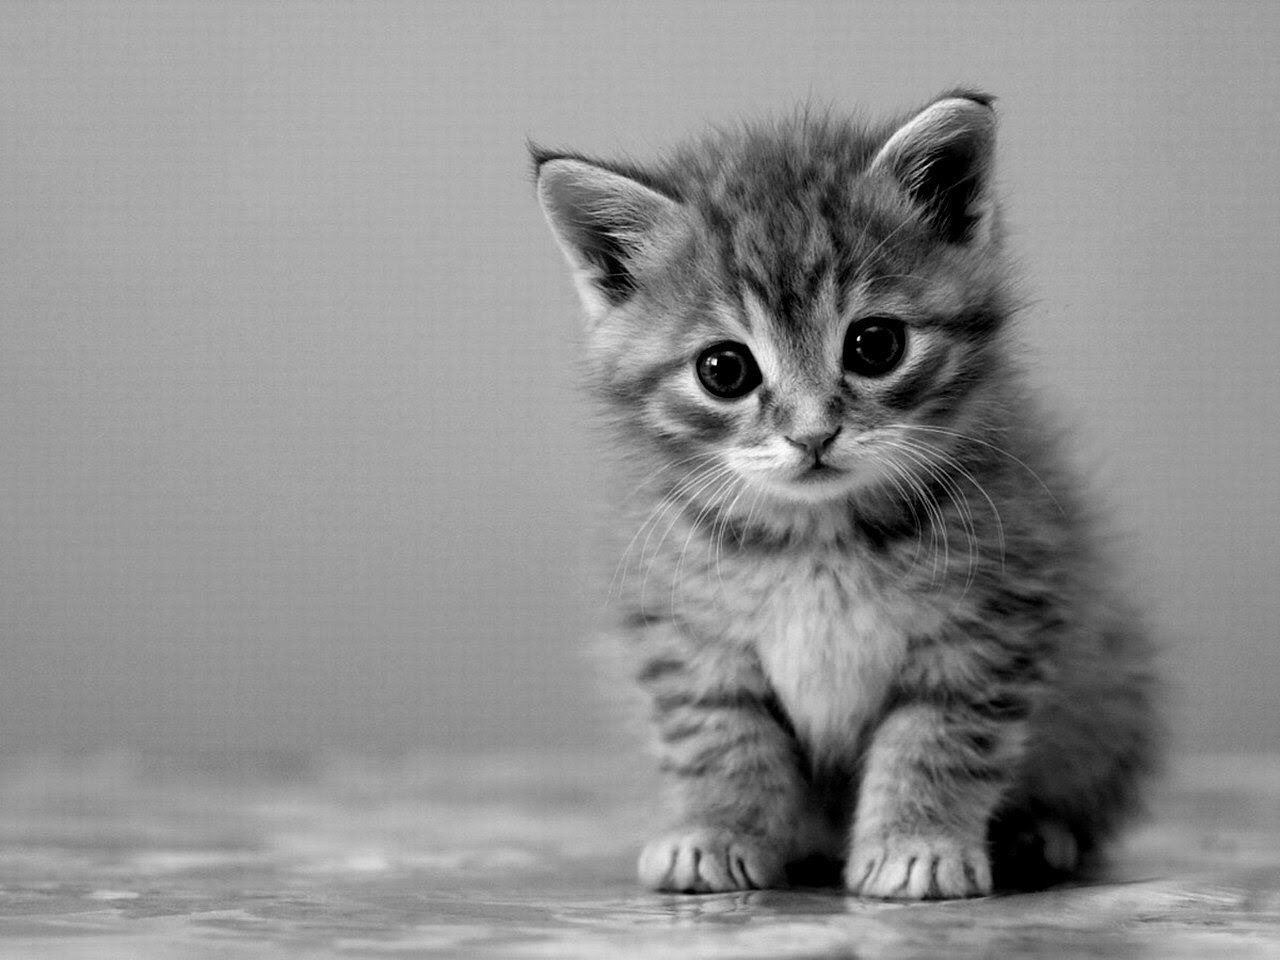 Cute Cat Photography: Black and white kitten!